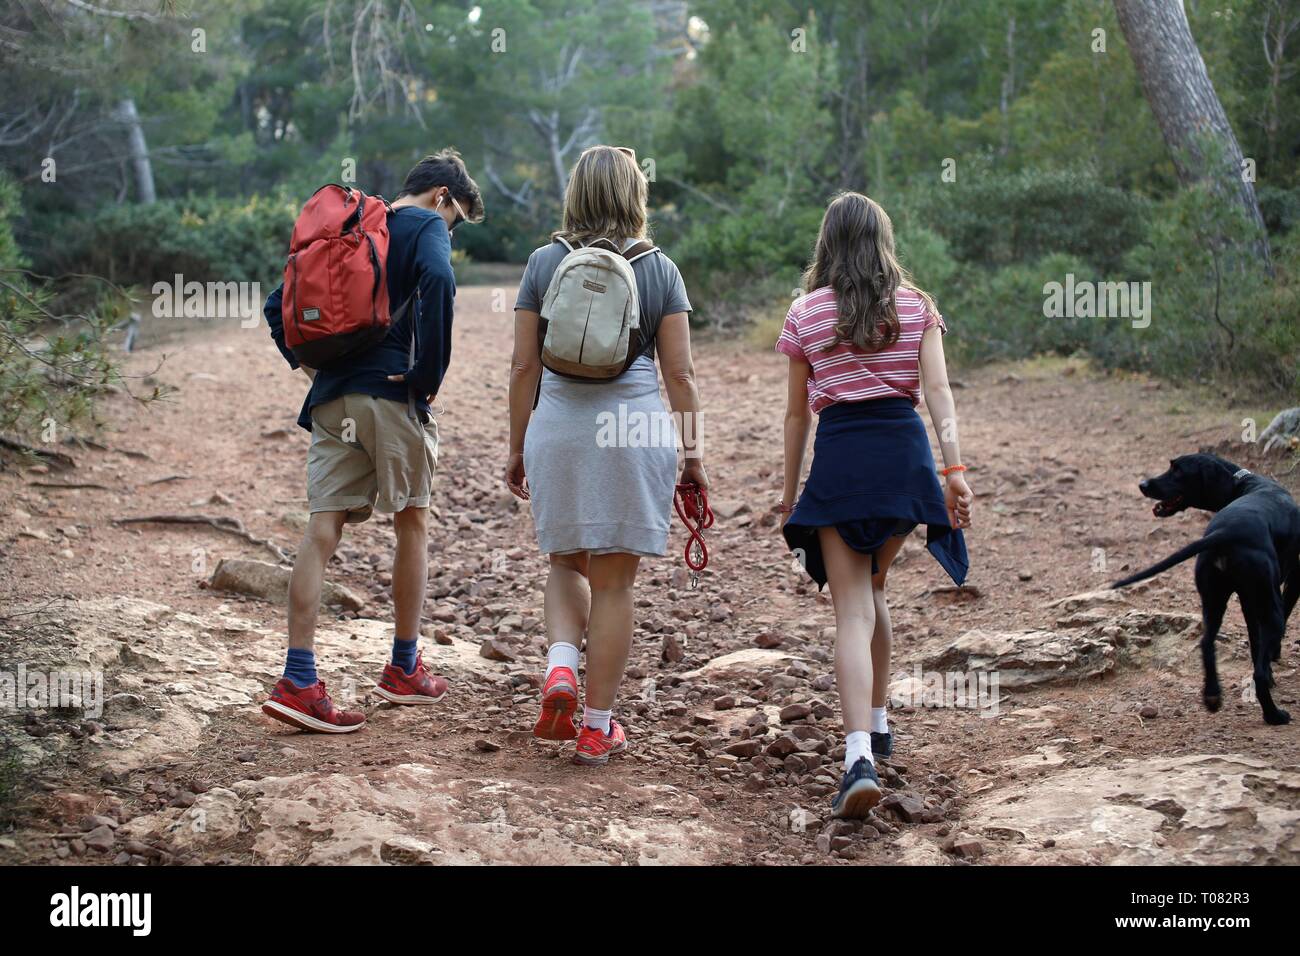 Back view of Mum and teenagers hiking in forest with dog Stock Photo